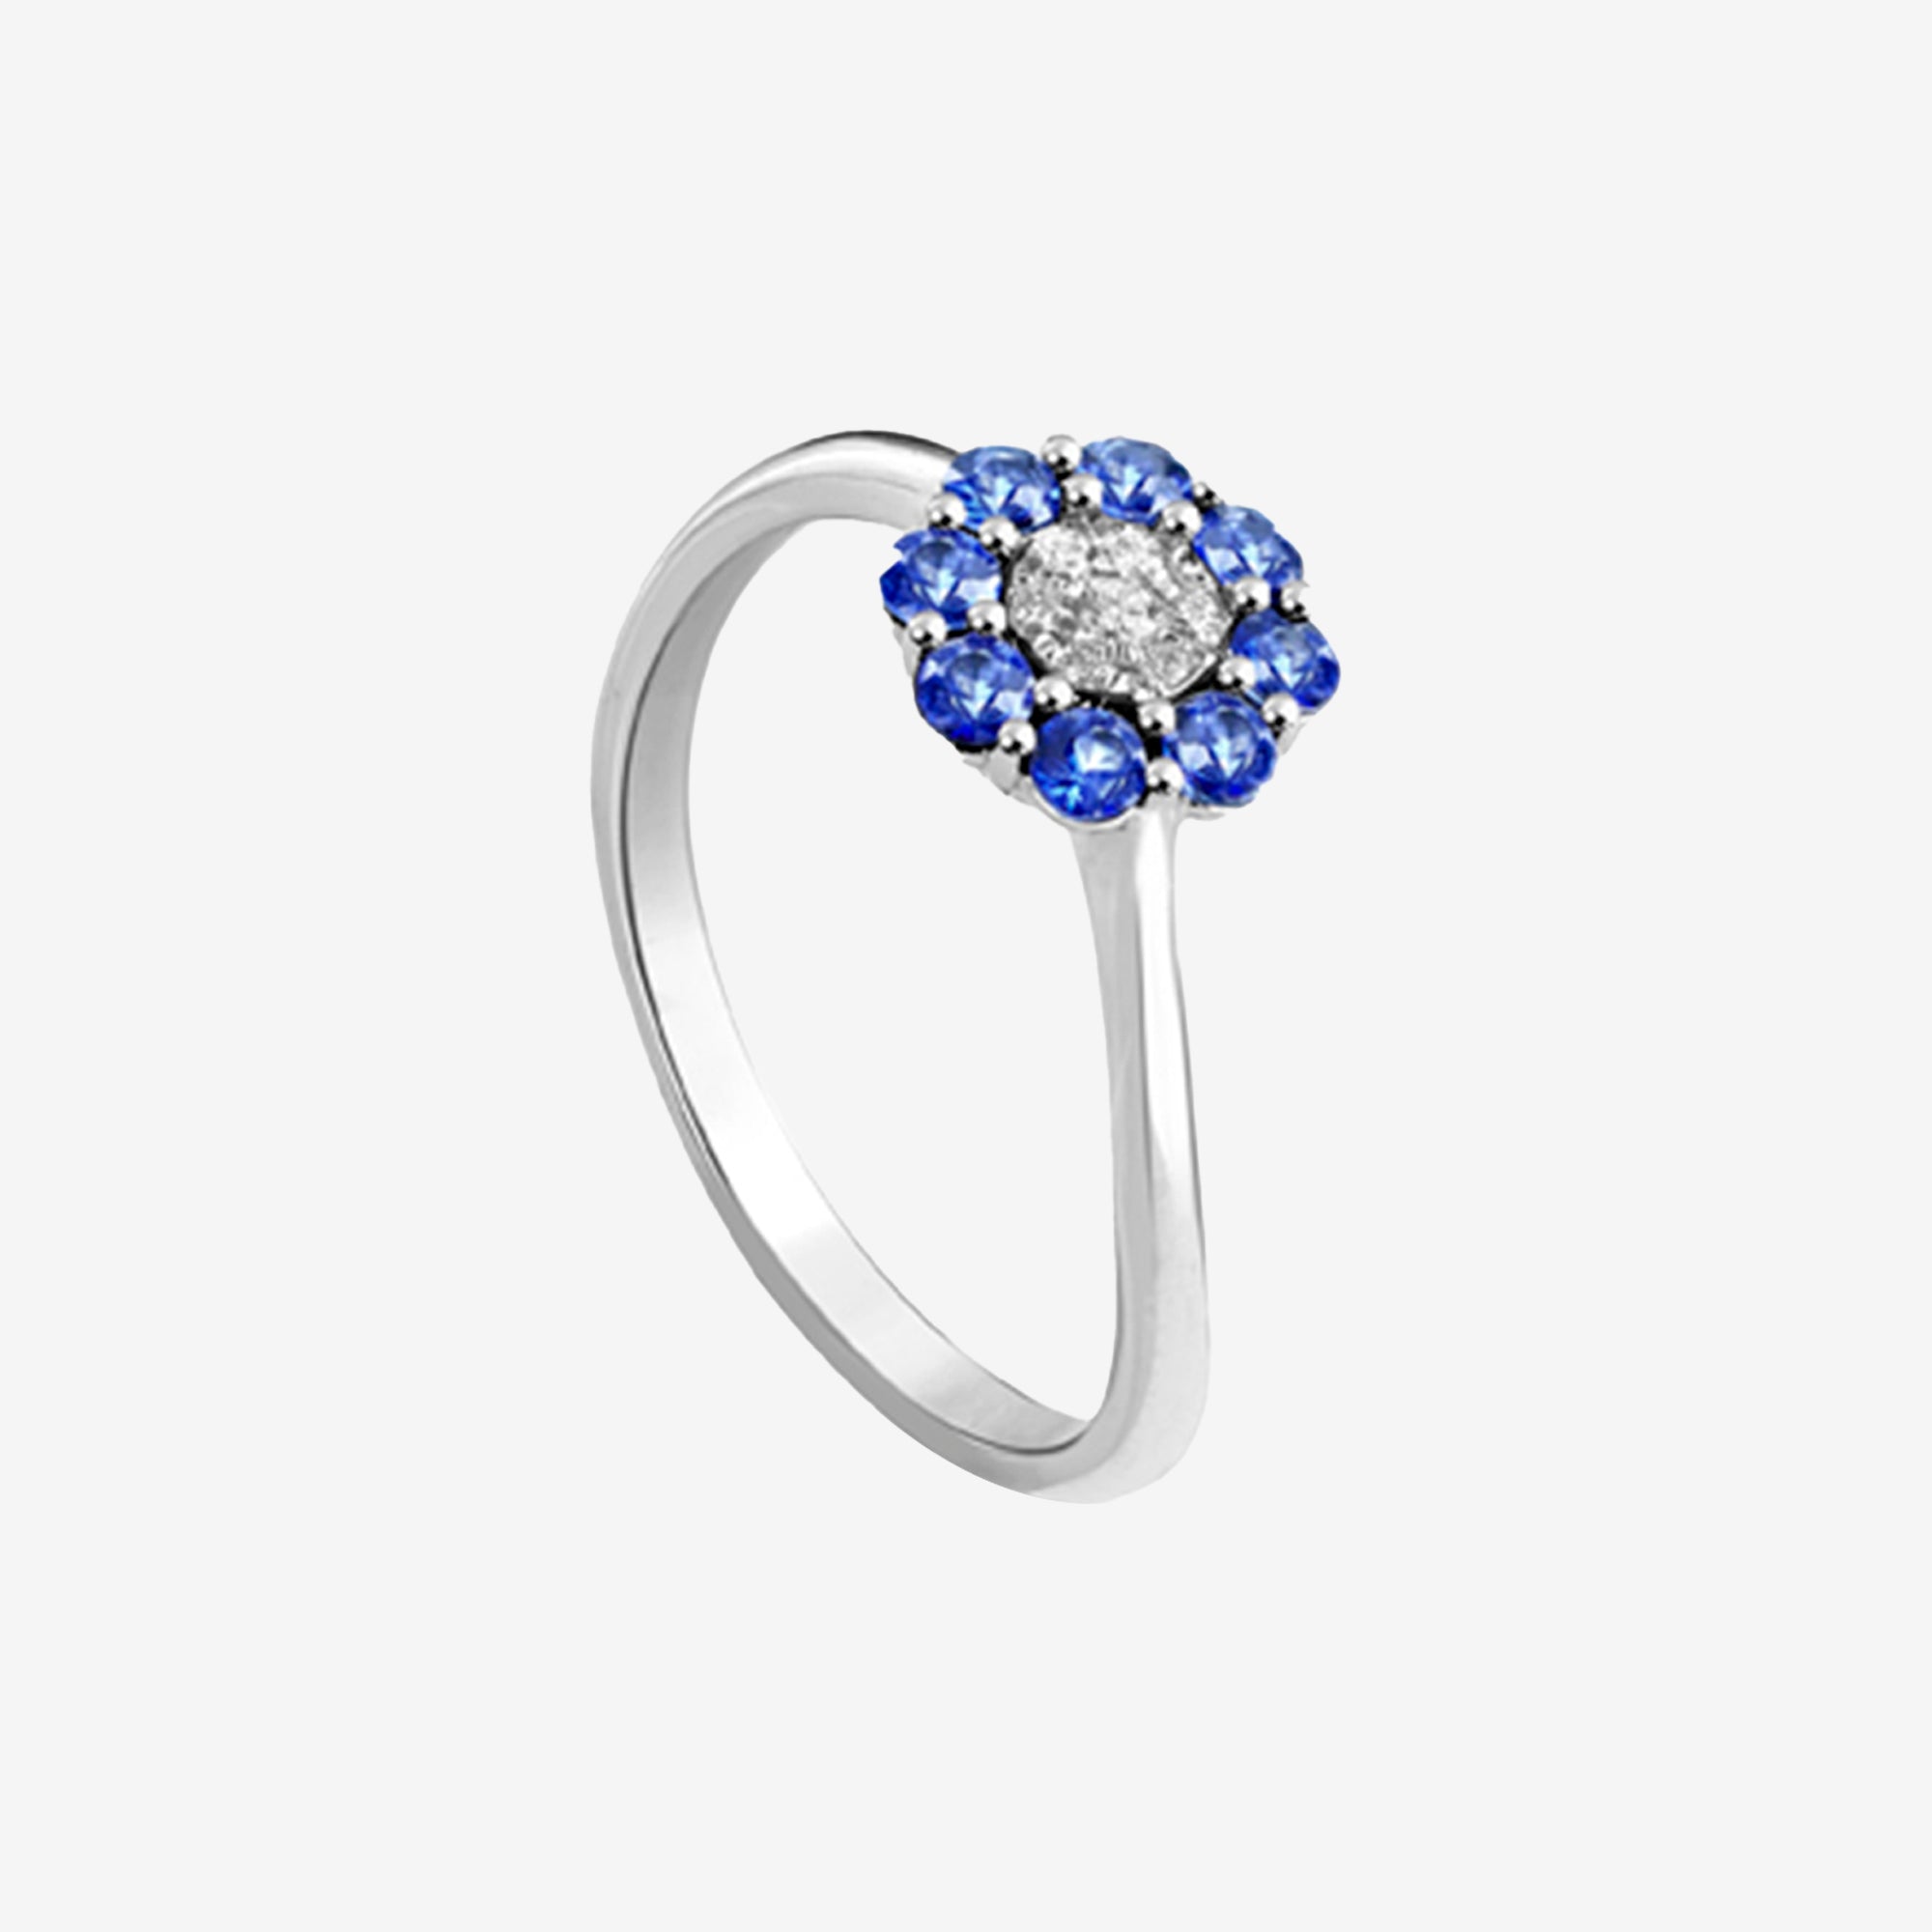 Sapphire Flower Ring with Diamonds and Sapphires